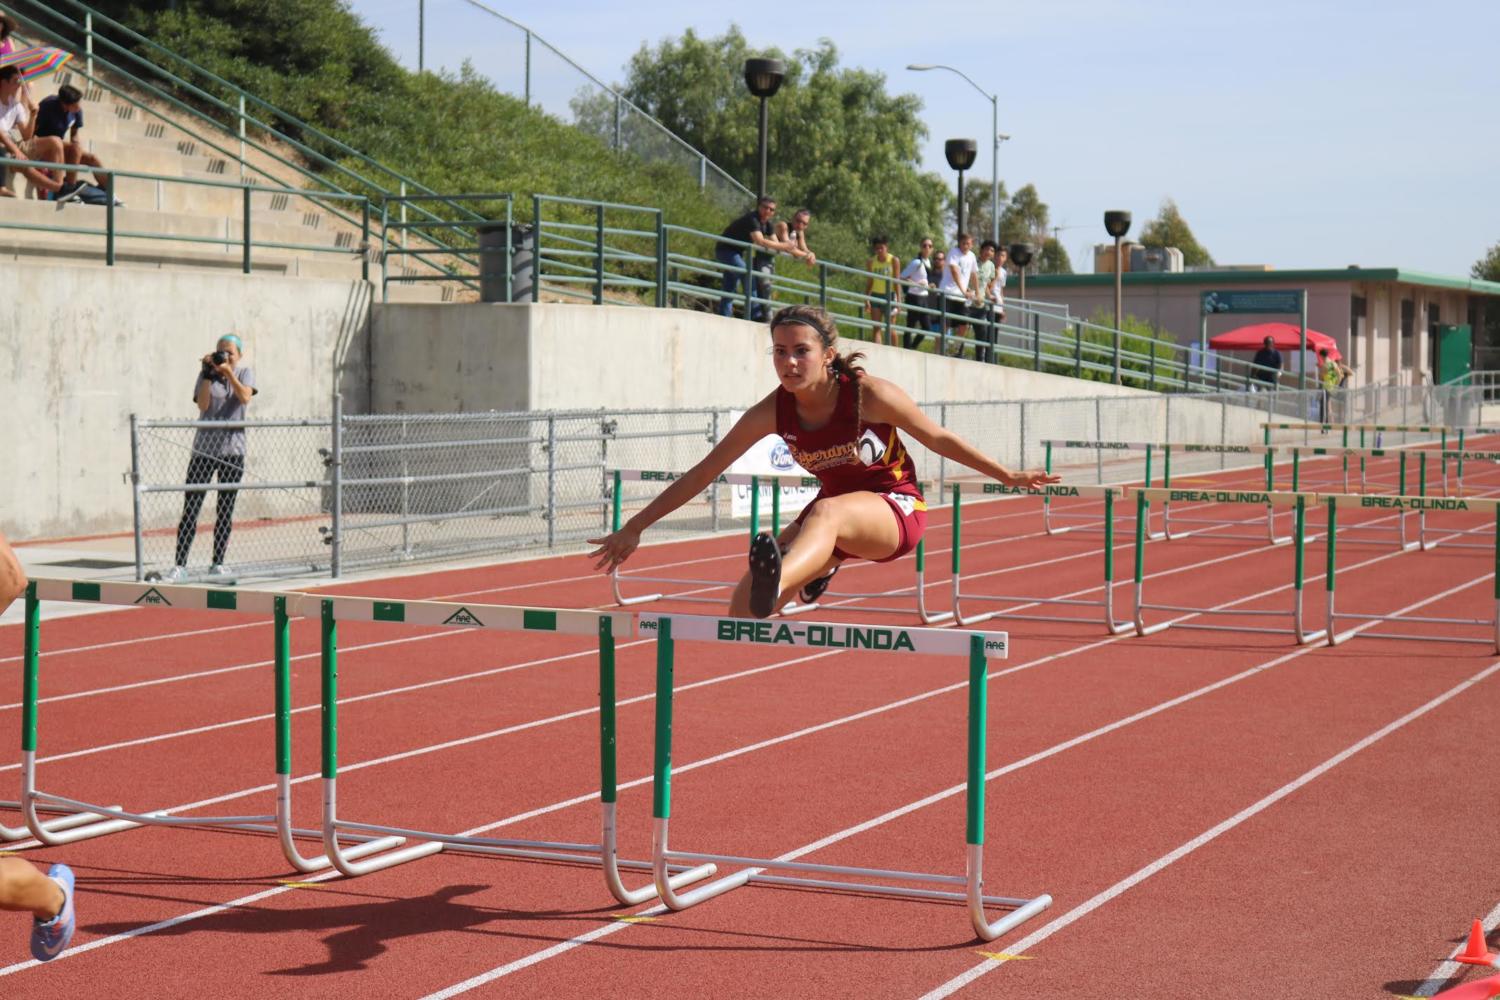 Junior, Jacqueline Chavez jumping over a hurdle during the race.